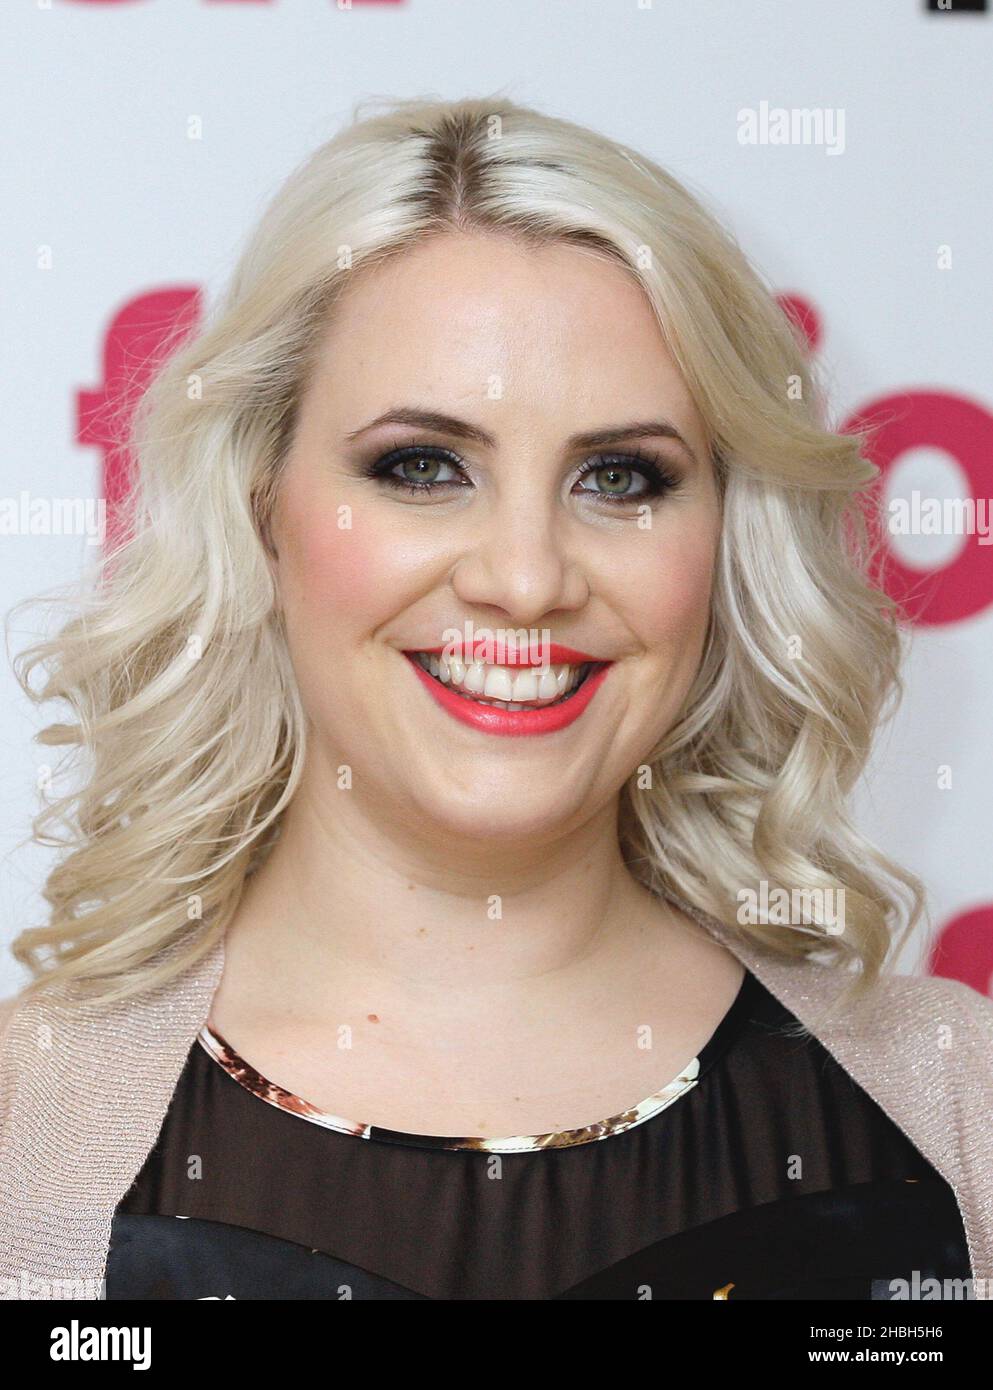 Claire Richards attending a photocall as a brand ambassador for retailer Fashion World at the BB Bakery in Covent Garden in London. Stock Photo